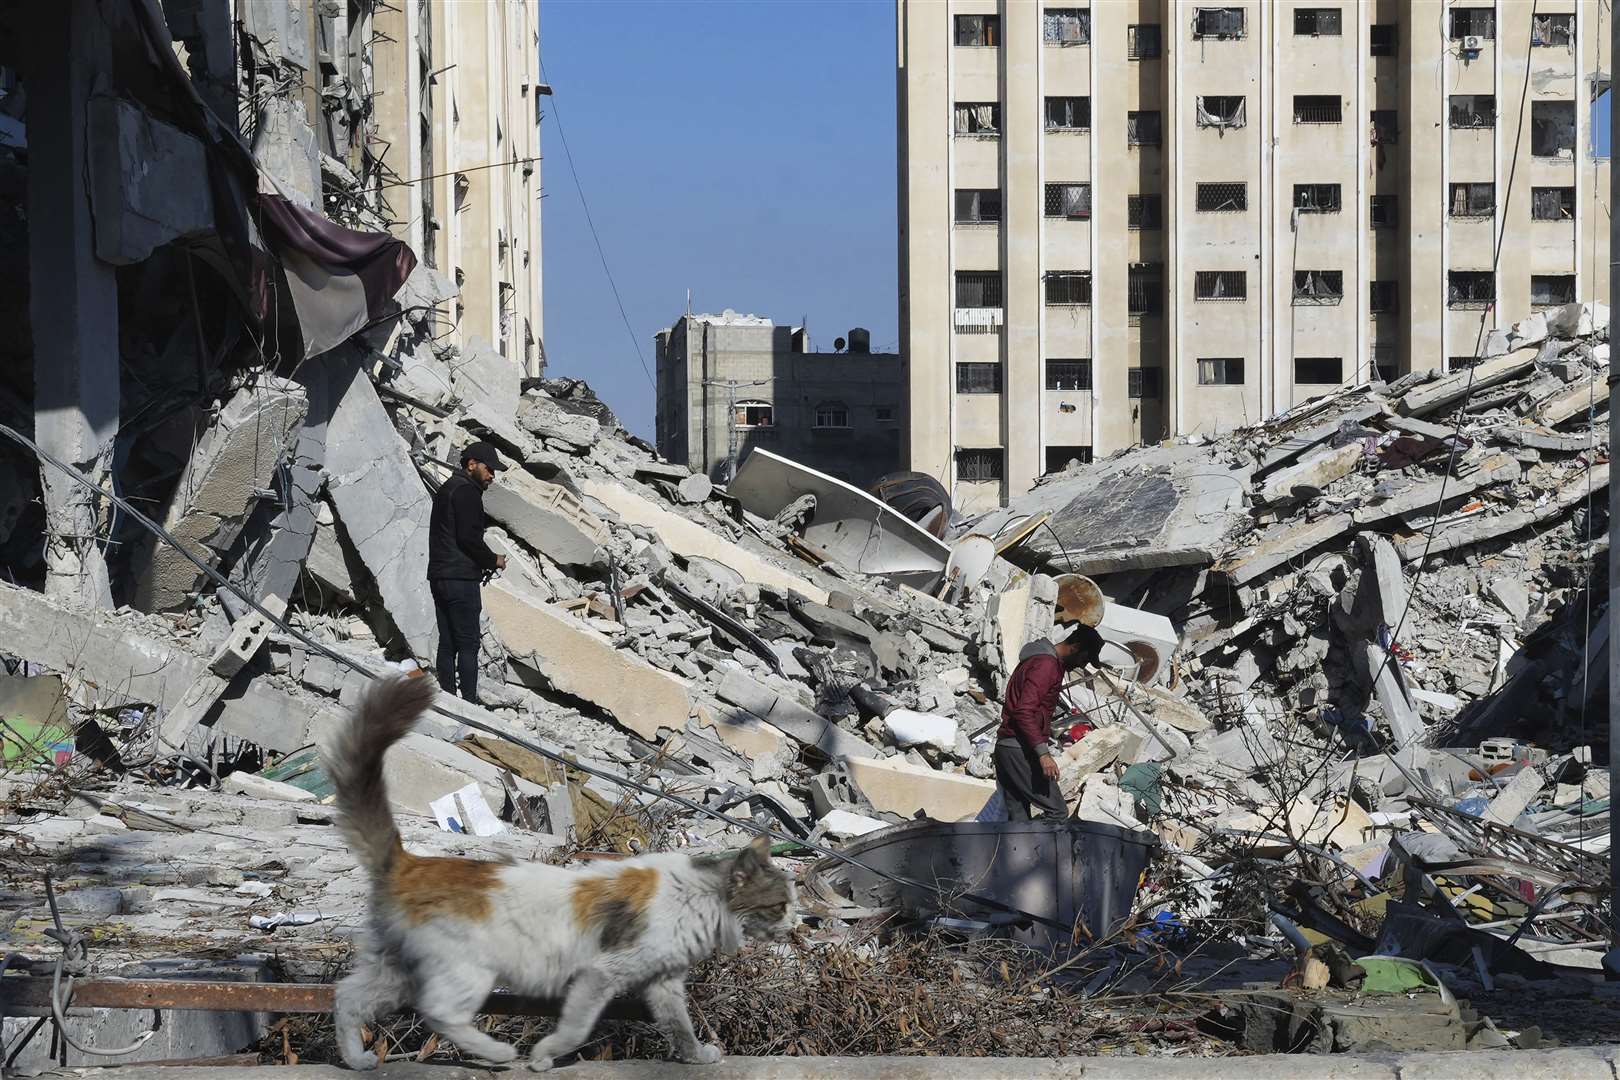 Palestinians walk through destruction from the Israeli bombardment in the Nusseirat refugee camp in the Gaza Strip on Friday (Adel Hana/AP)